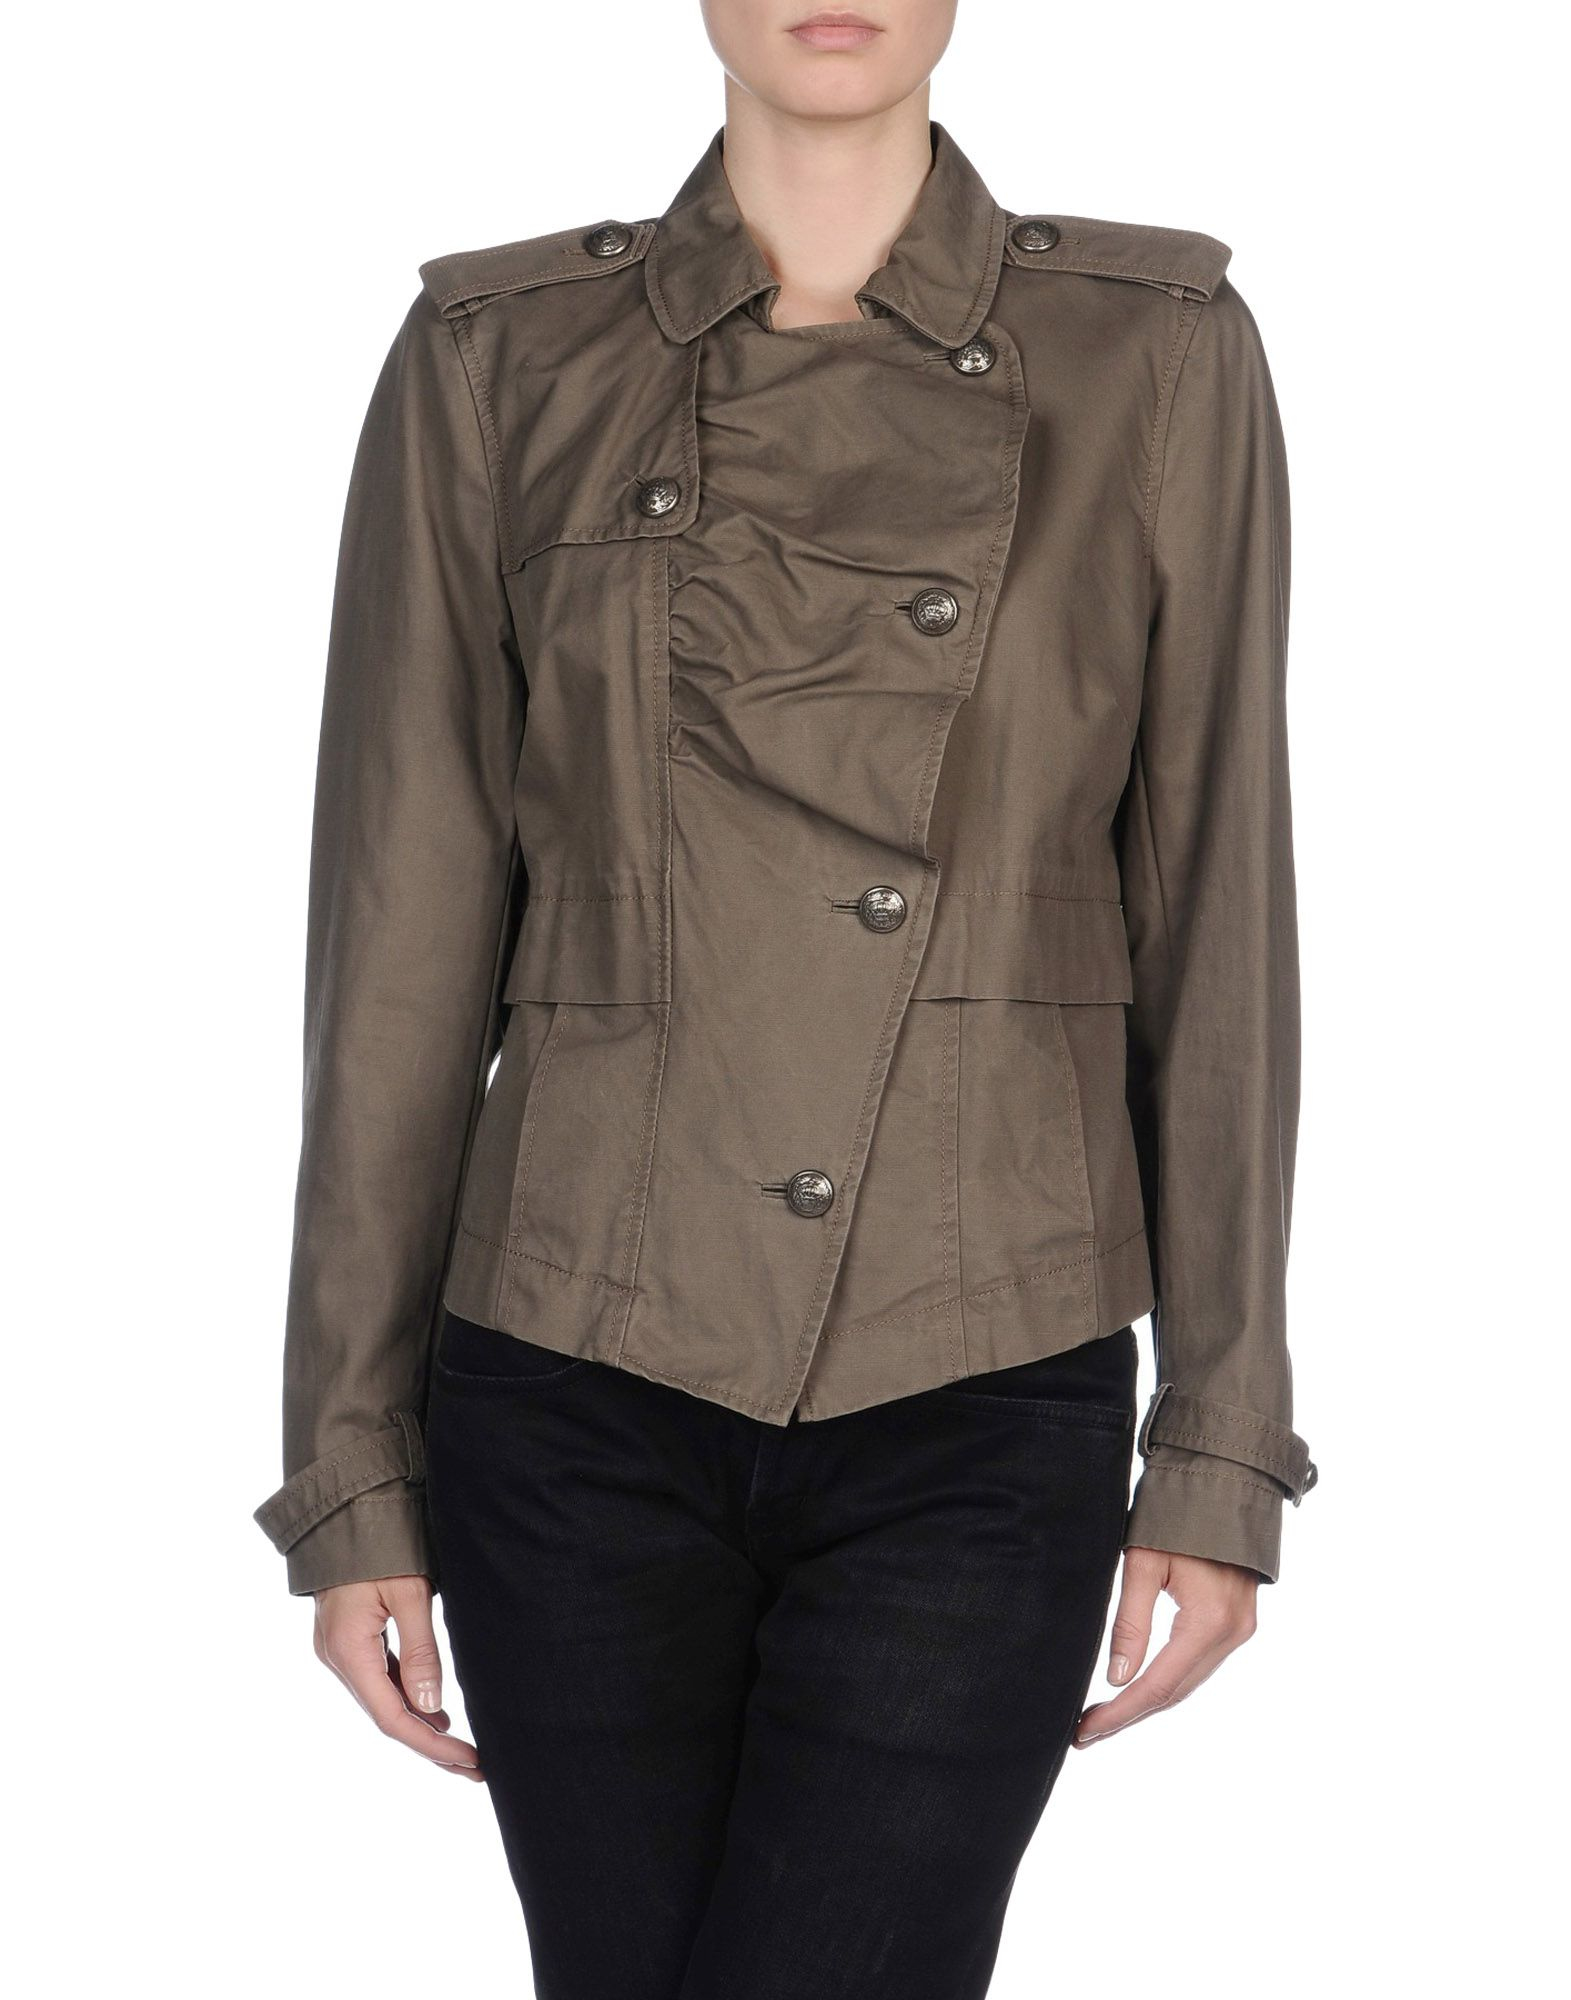 Juicy Couture Jacket in Natural - Lyst